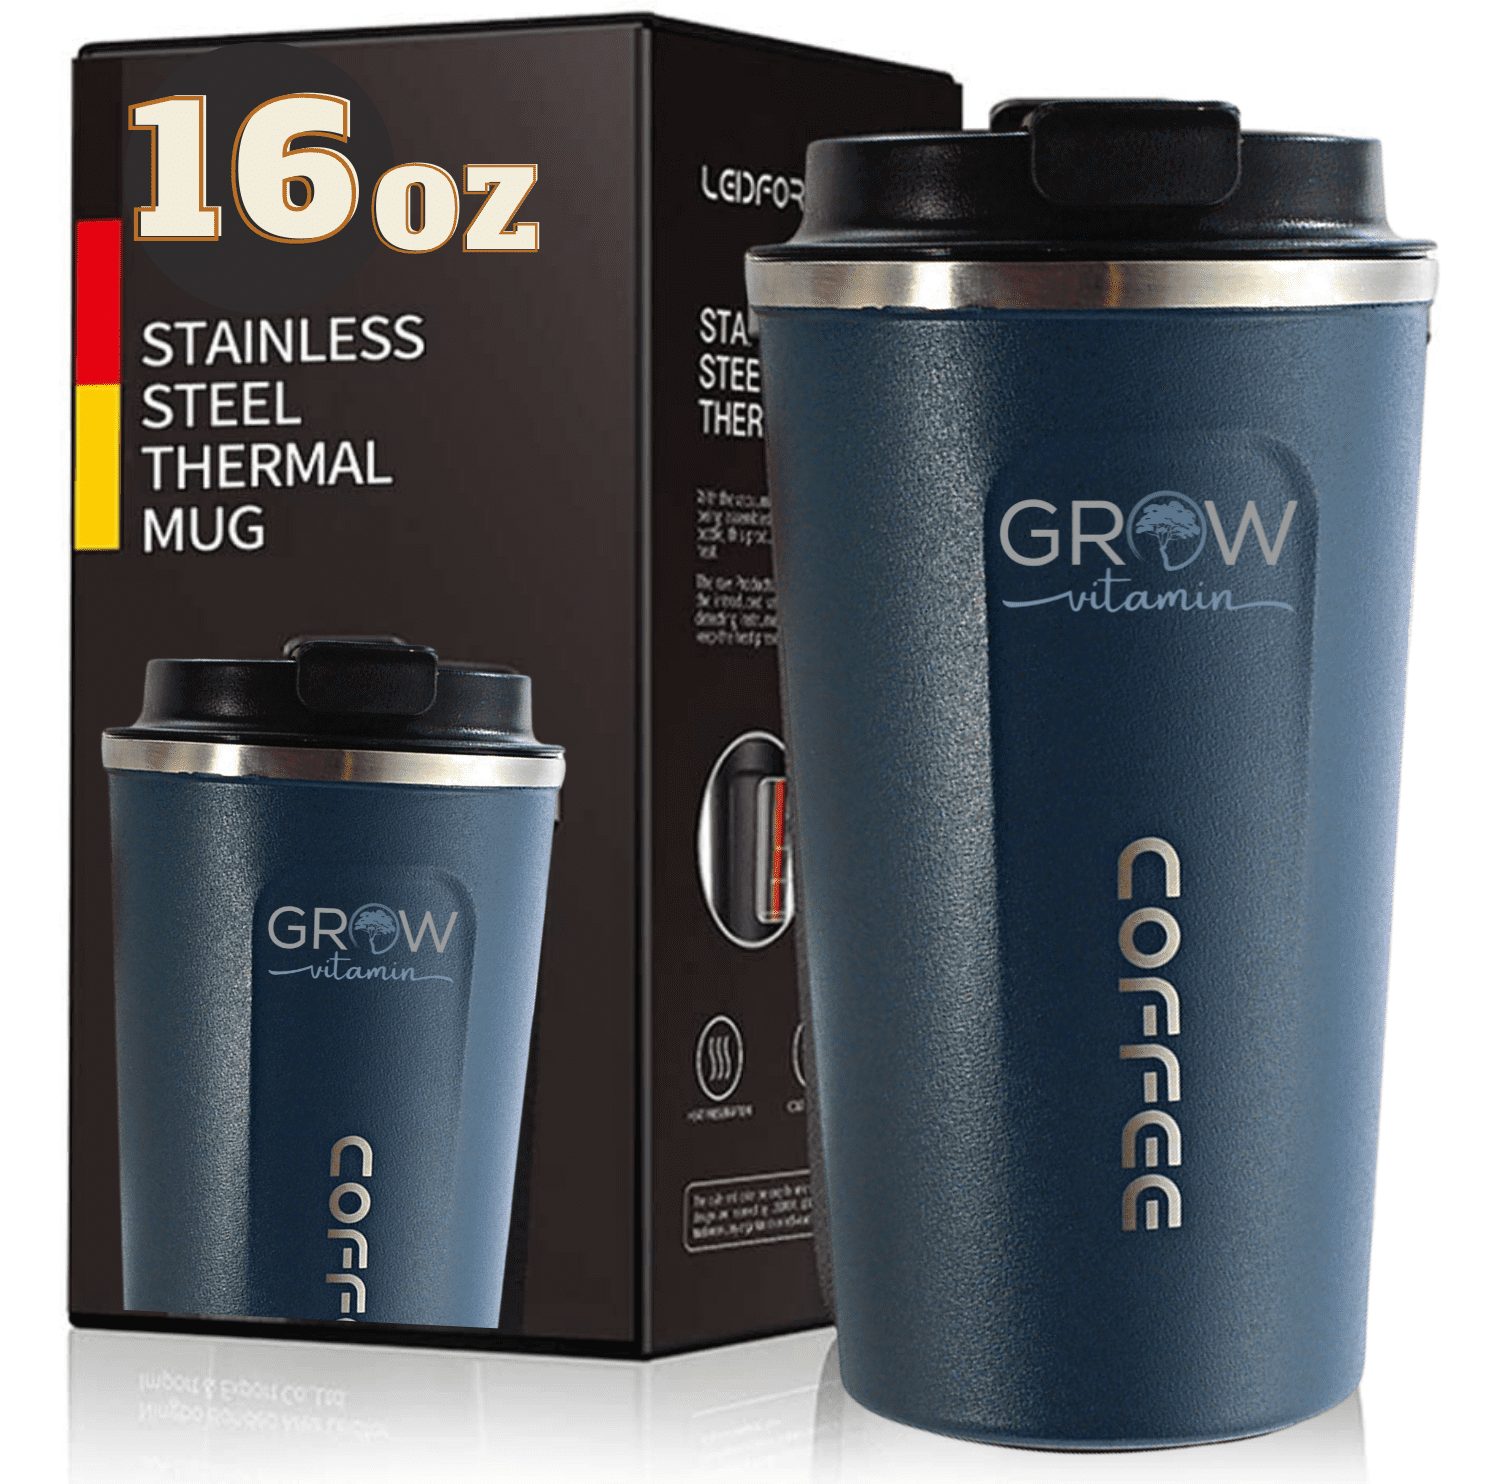 Deep Star Night Stainless steel water cup Thermos cup Personality Insulated Bottle Vacuum Insulated Water Bottle Stainless Steel Thermos Travel Cup Coffee & Tea Stainless Steel Vacuum Flask 